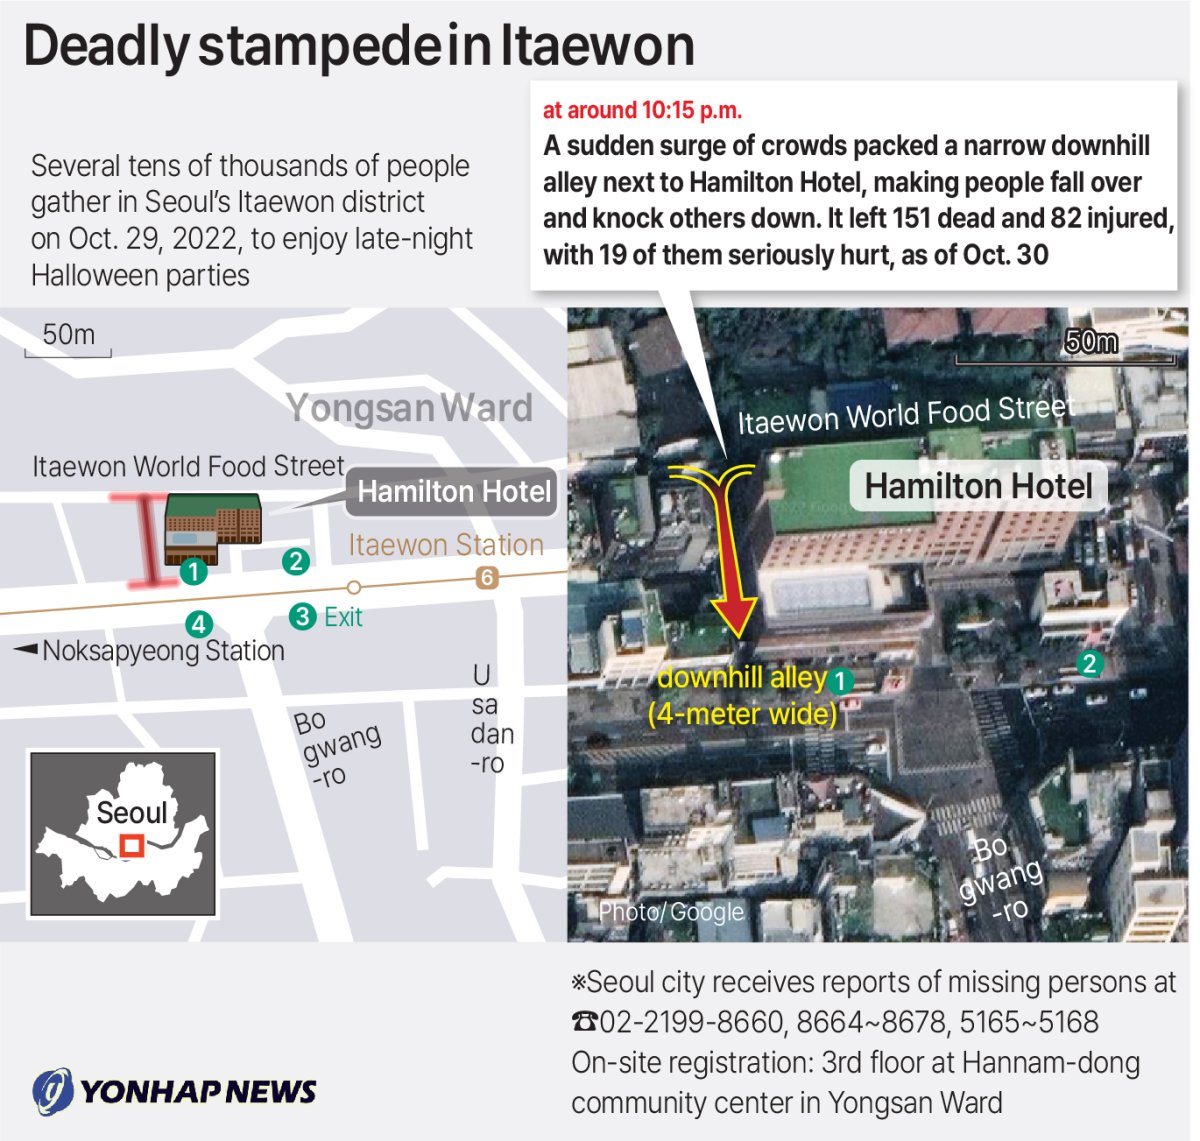 Deadly stampede in Itaewon